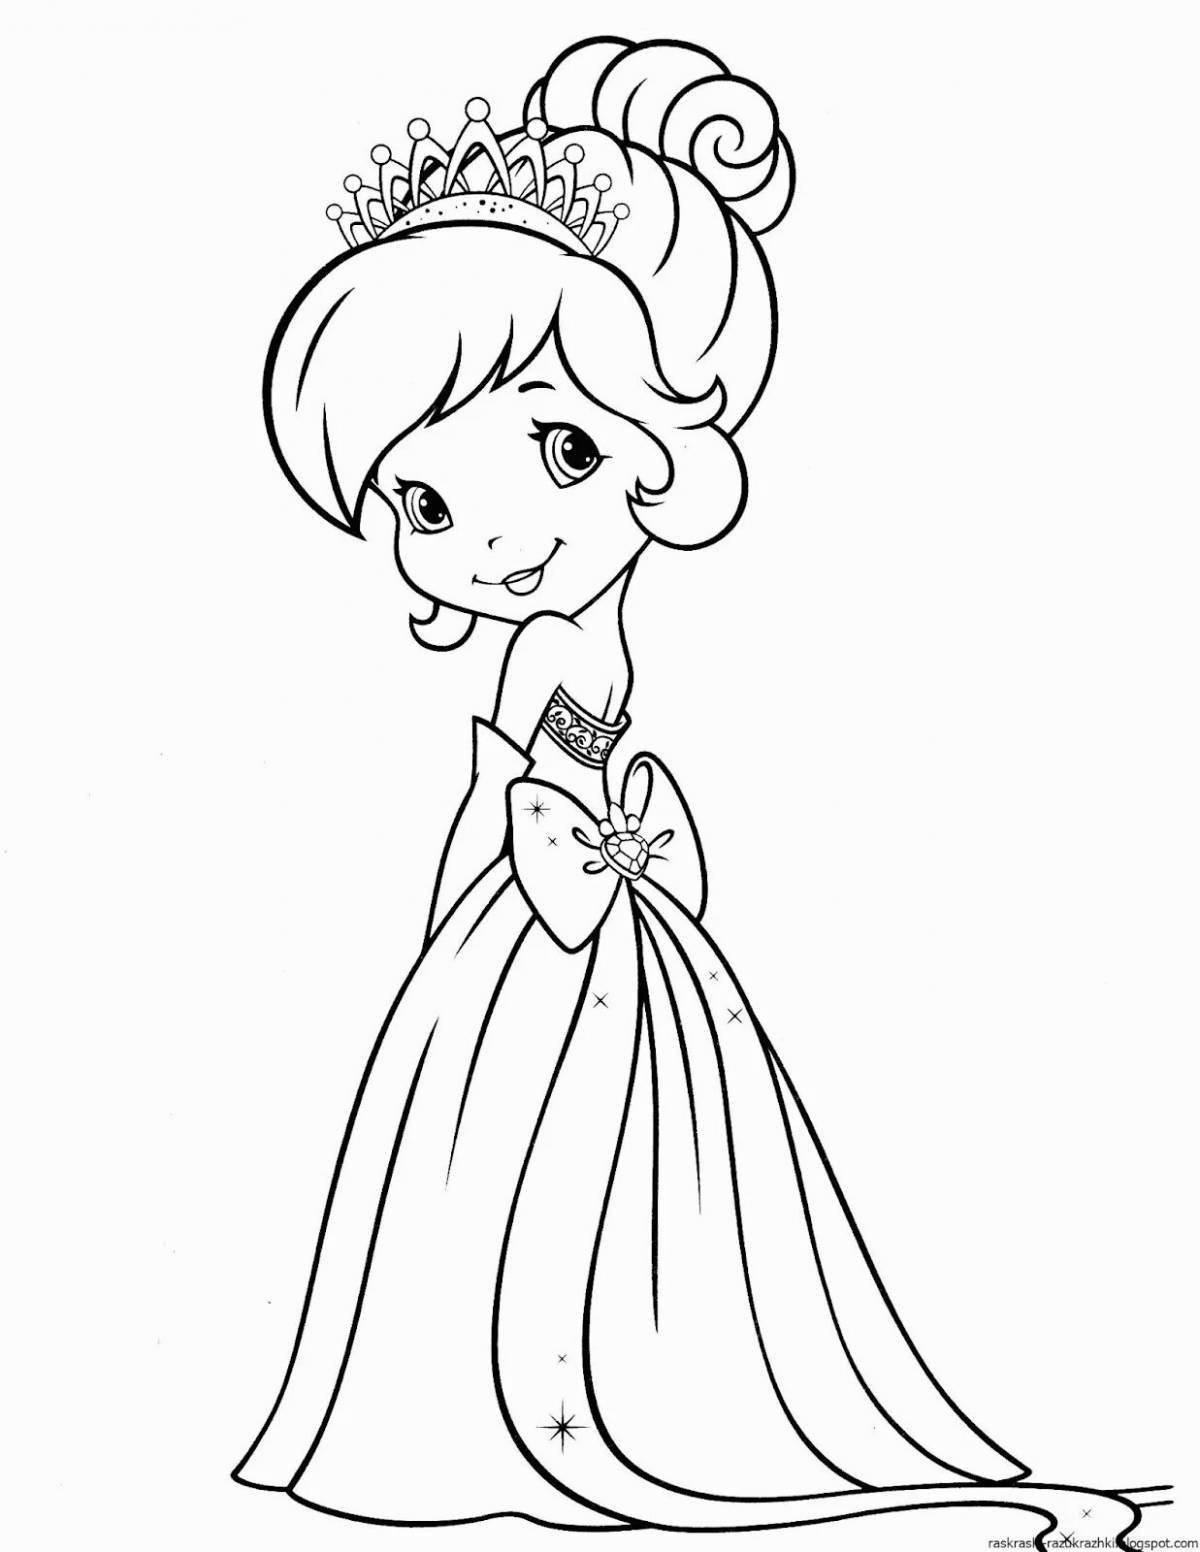 Elegant coloring book for girls 5 years old, princess